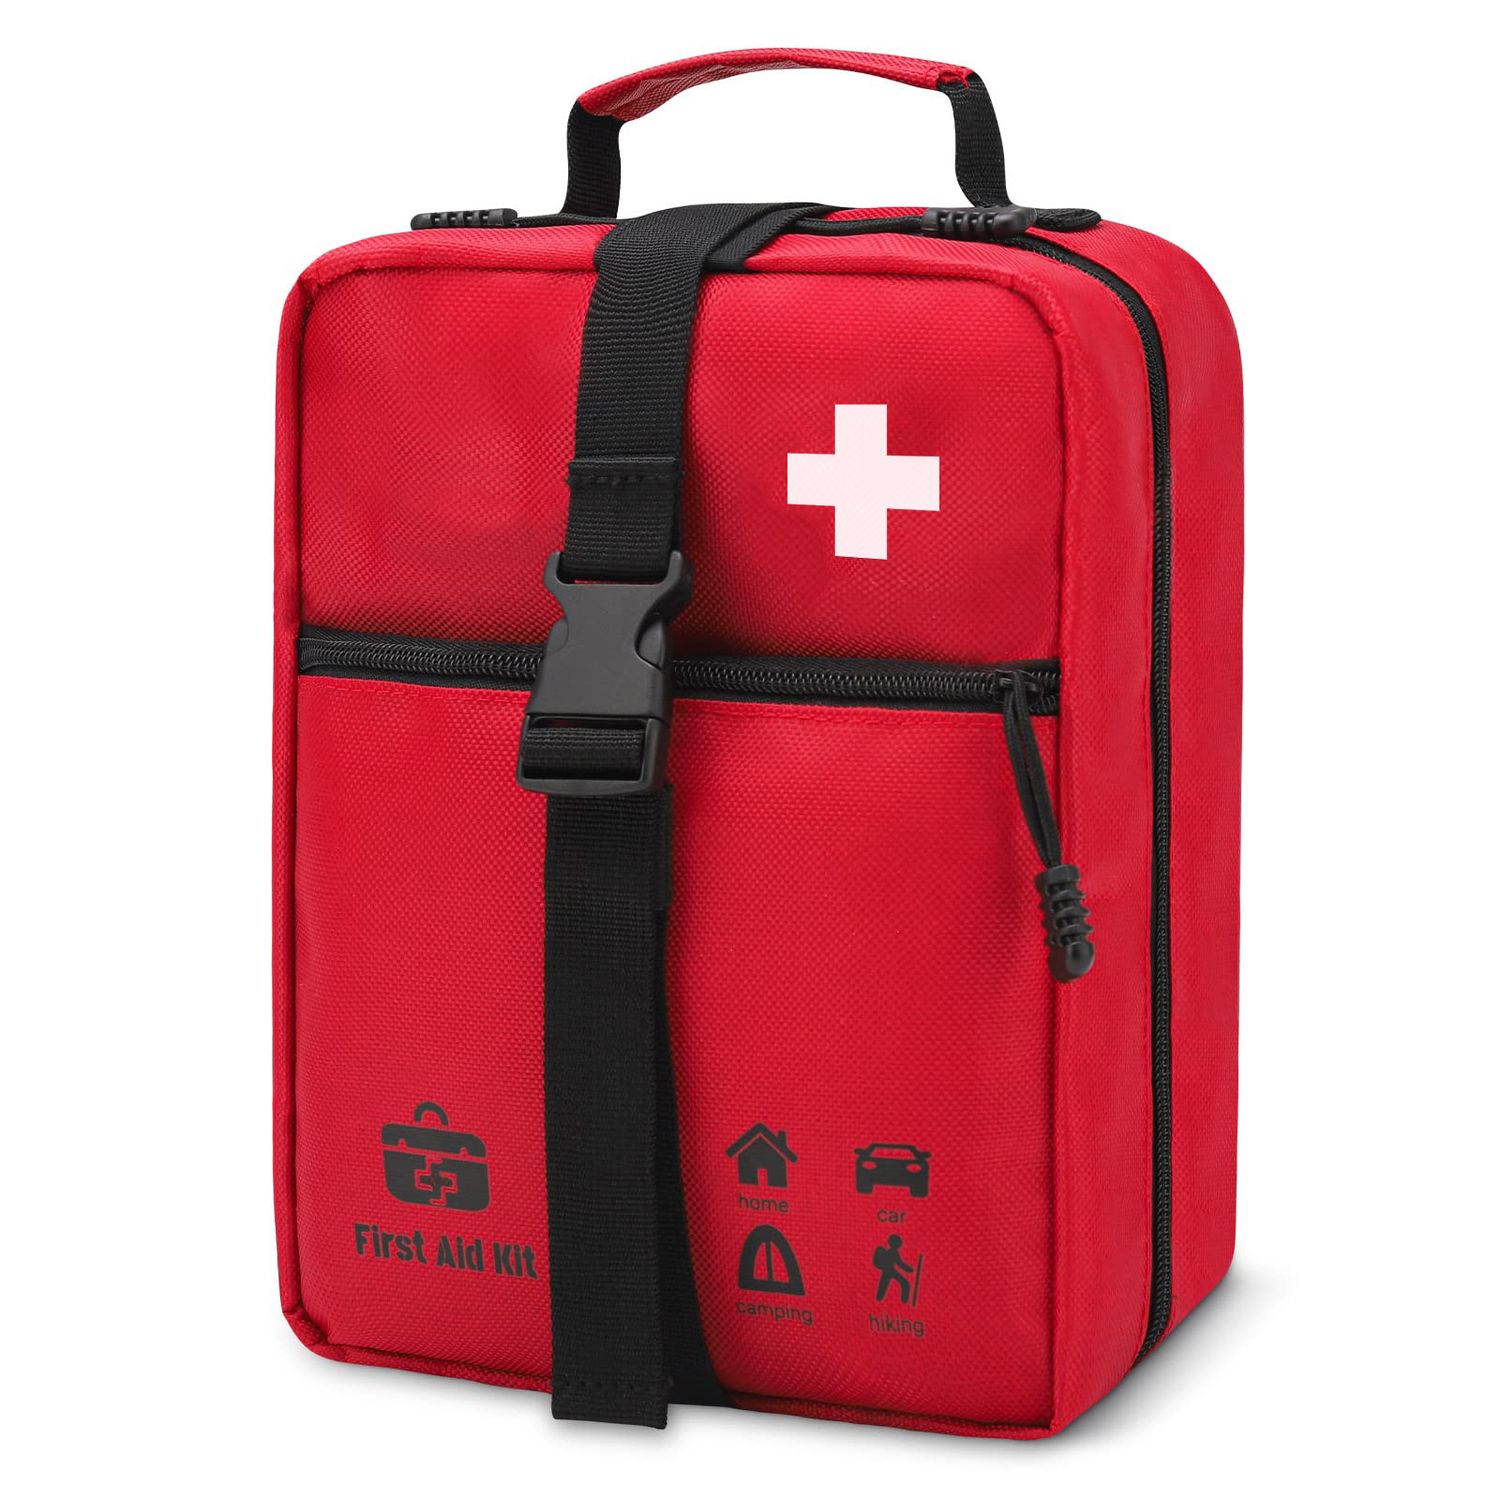 Risen Medical 400 Piece Red Large Survival Medical First Aid Kit with Secure Seal